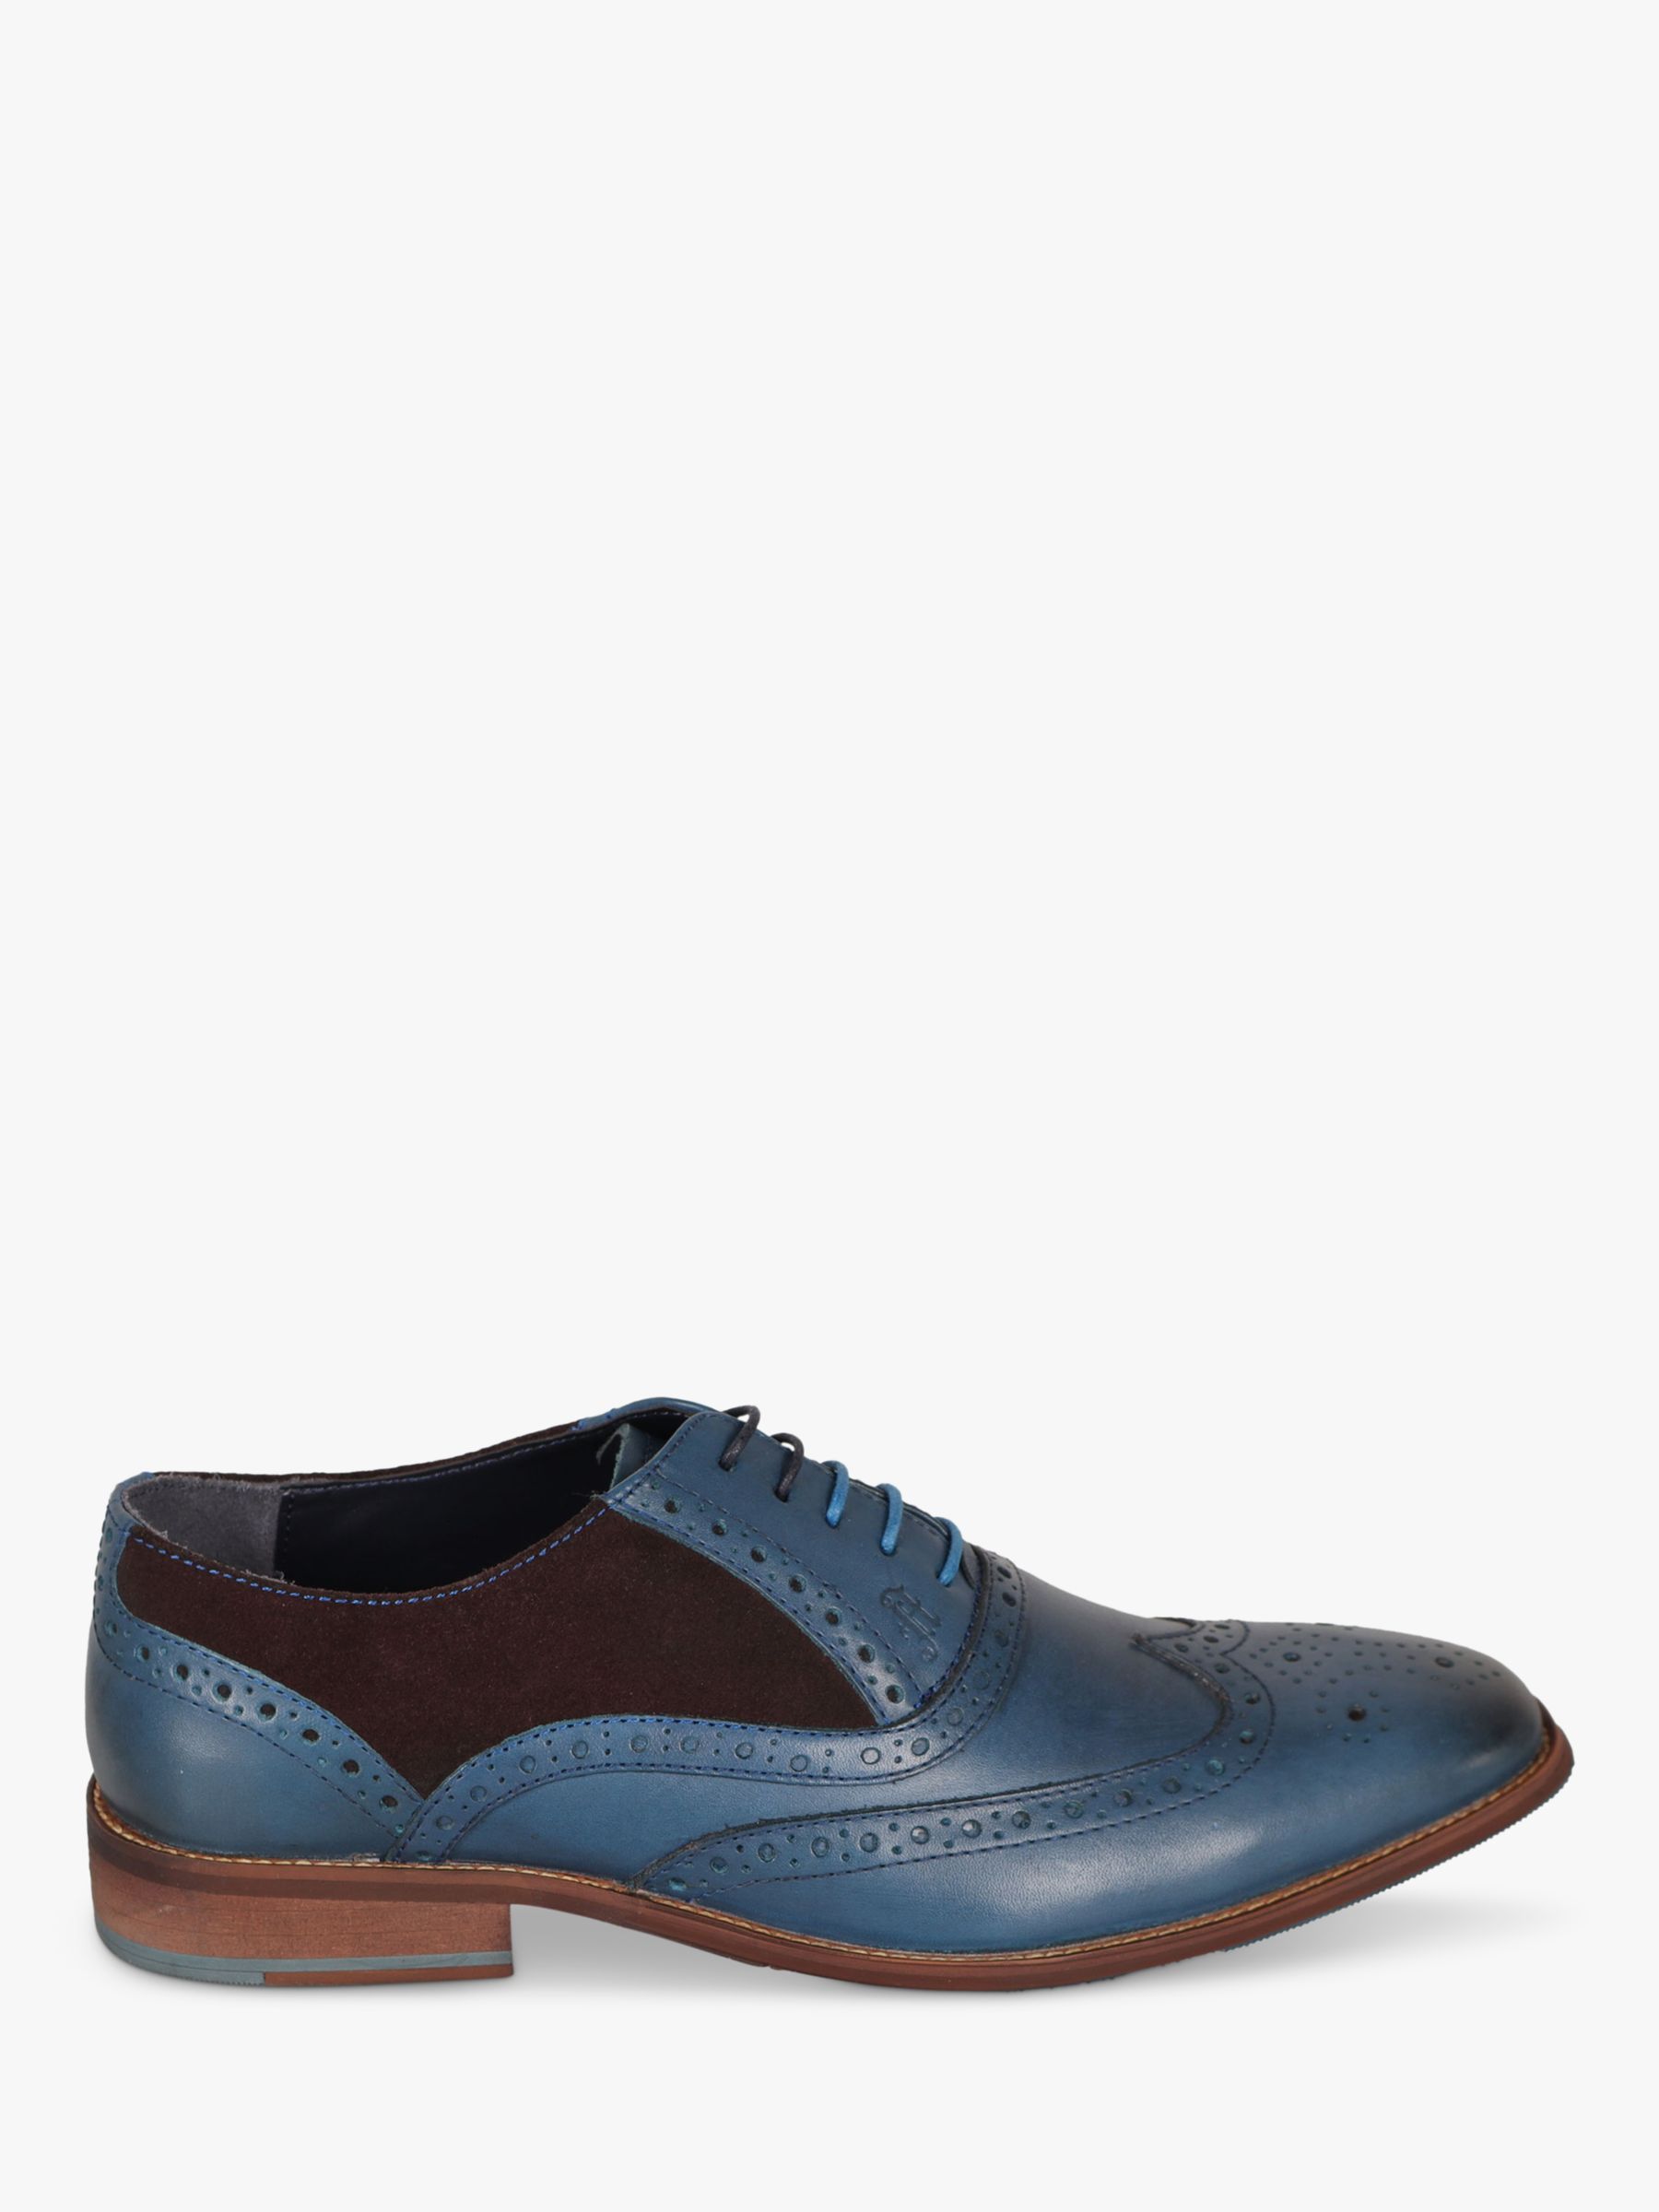 Silver Street London Amen Collection Waterford Leather Brogues, Blue/Brown, 8